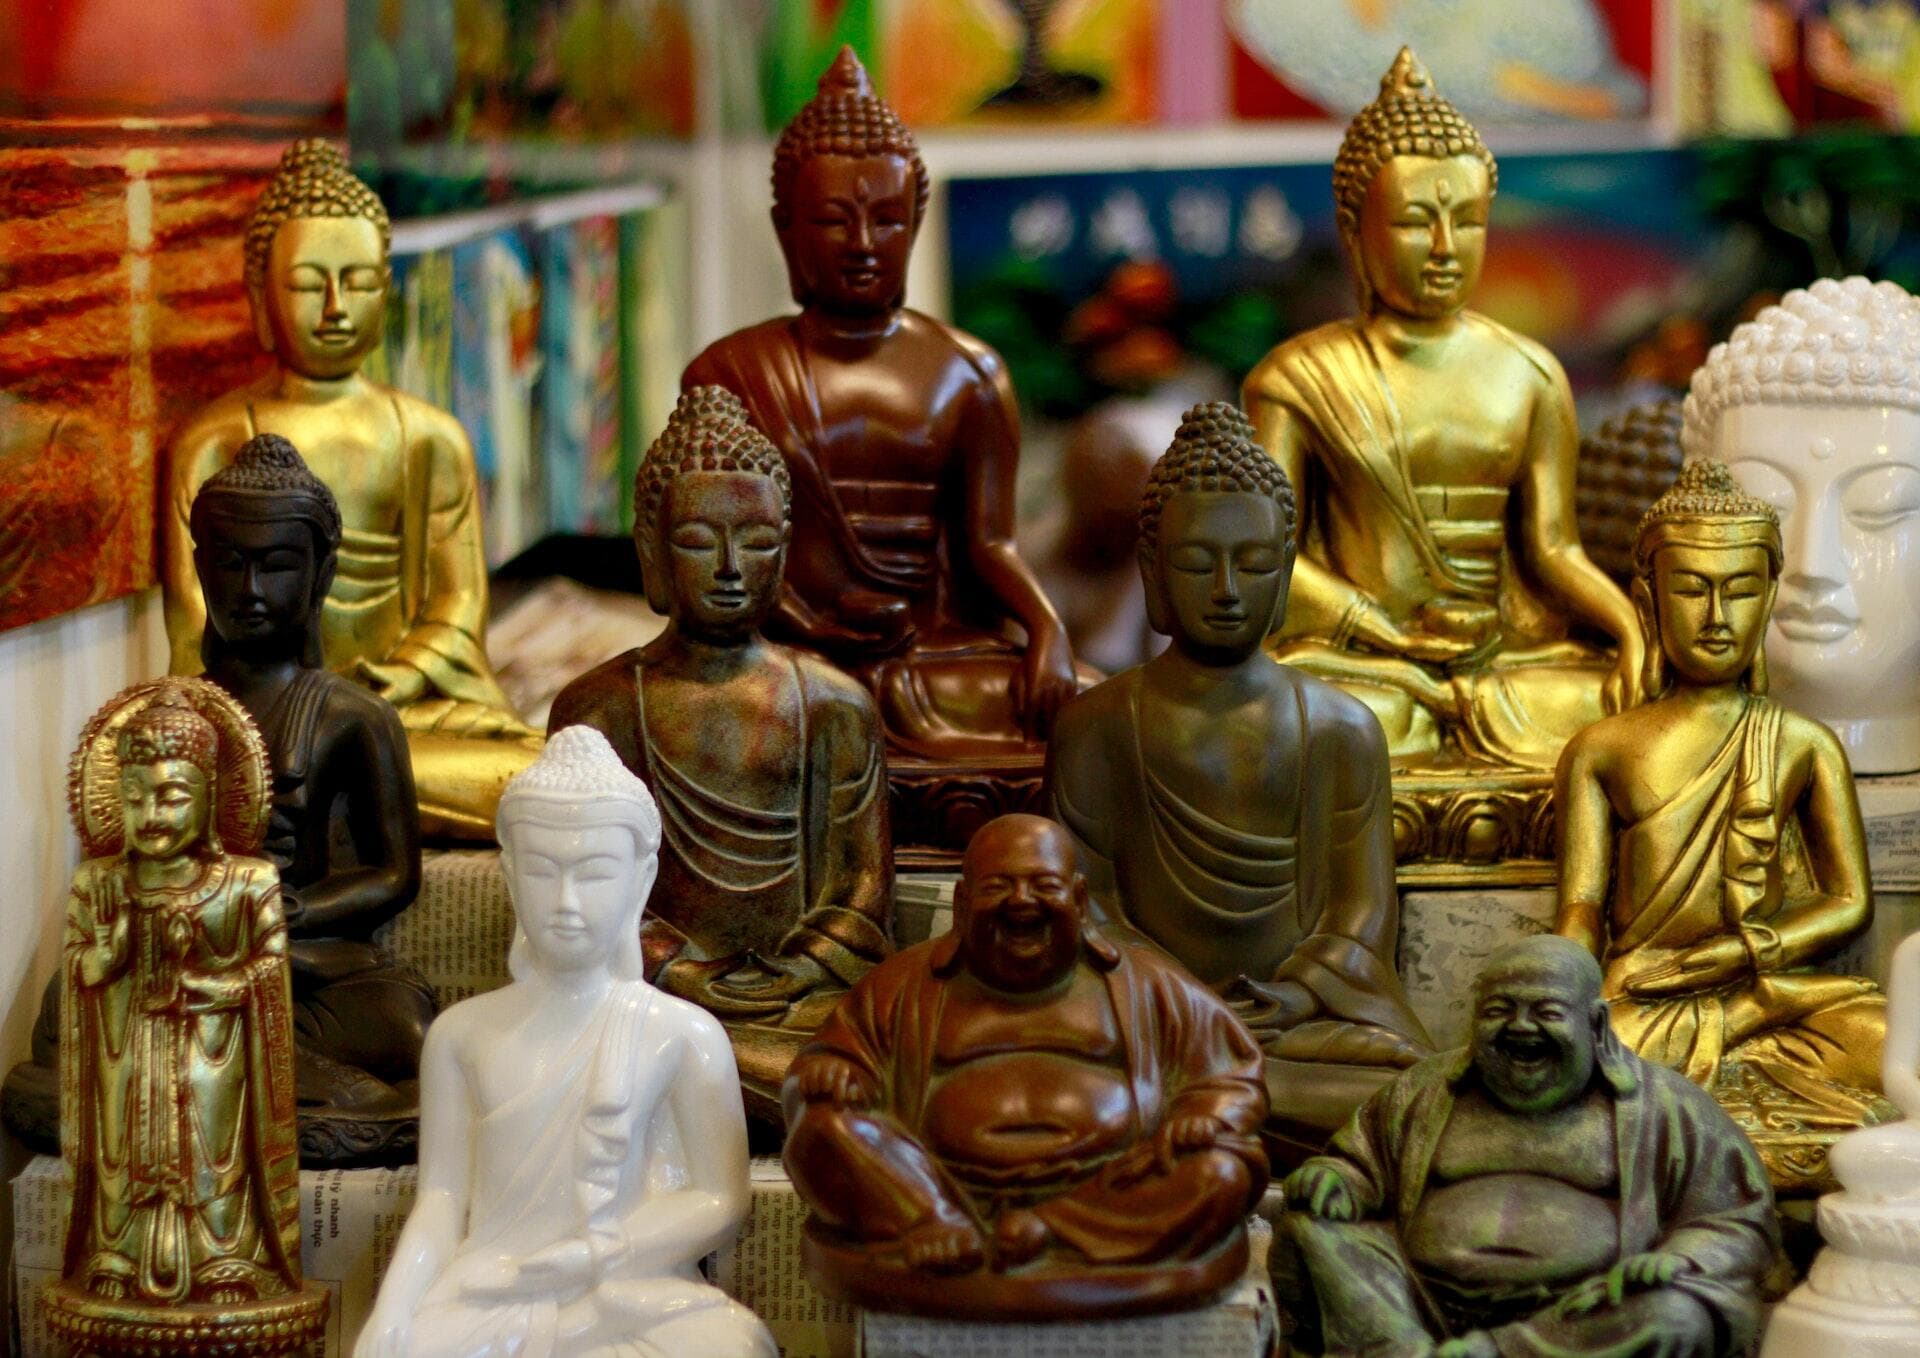 A Table of Buddha Statues